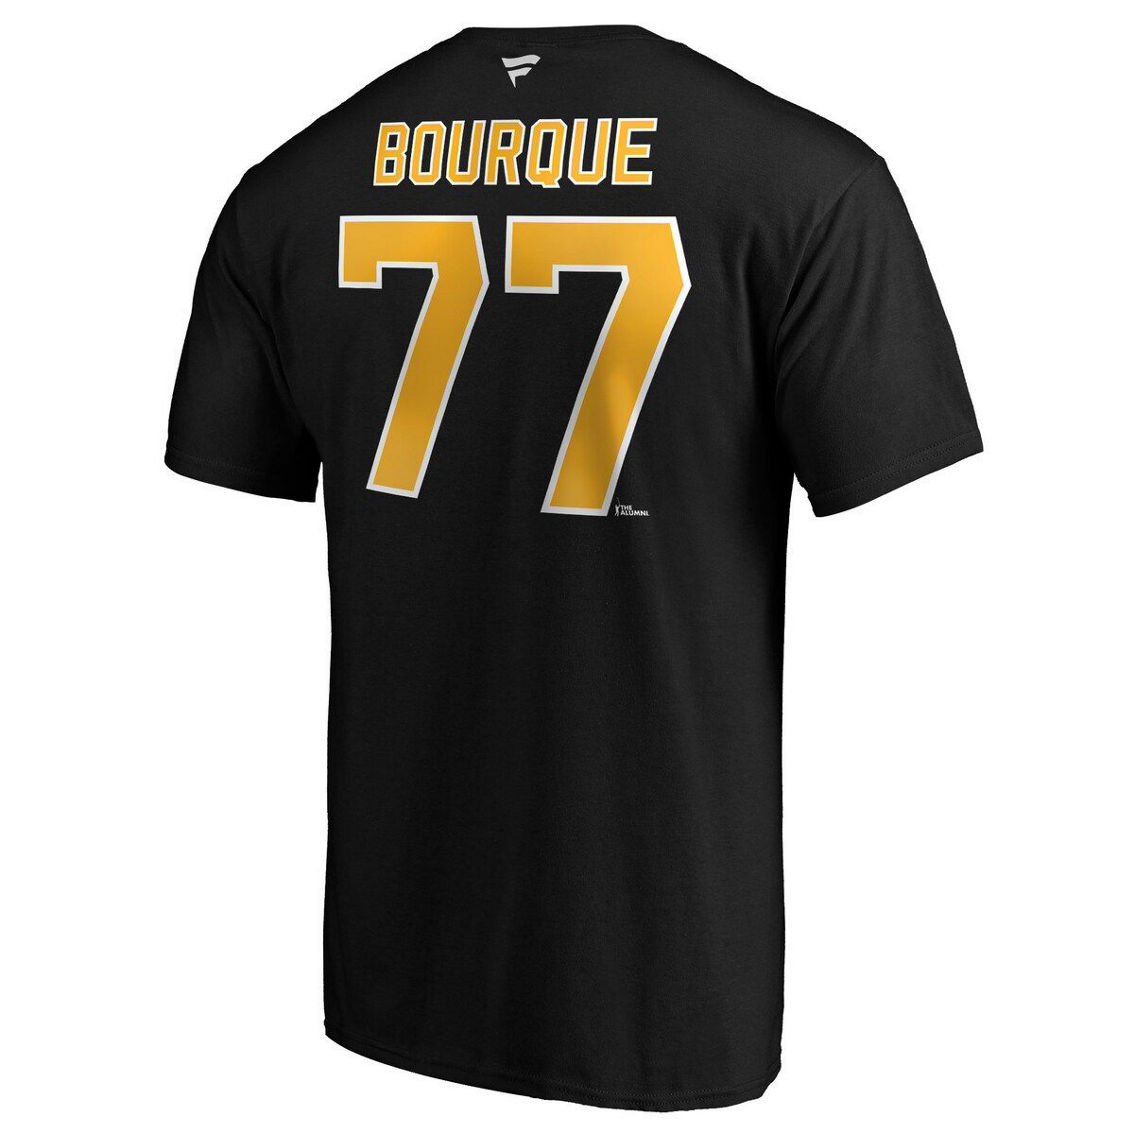 Fanatics Branded Men's Ray Bourque Black Boston Bruins Authentic Stack Retired Player Name & Number T-Shirt - Image 4 of 4